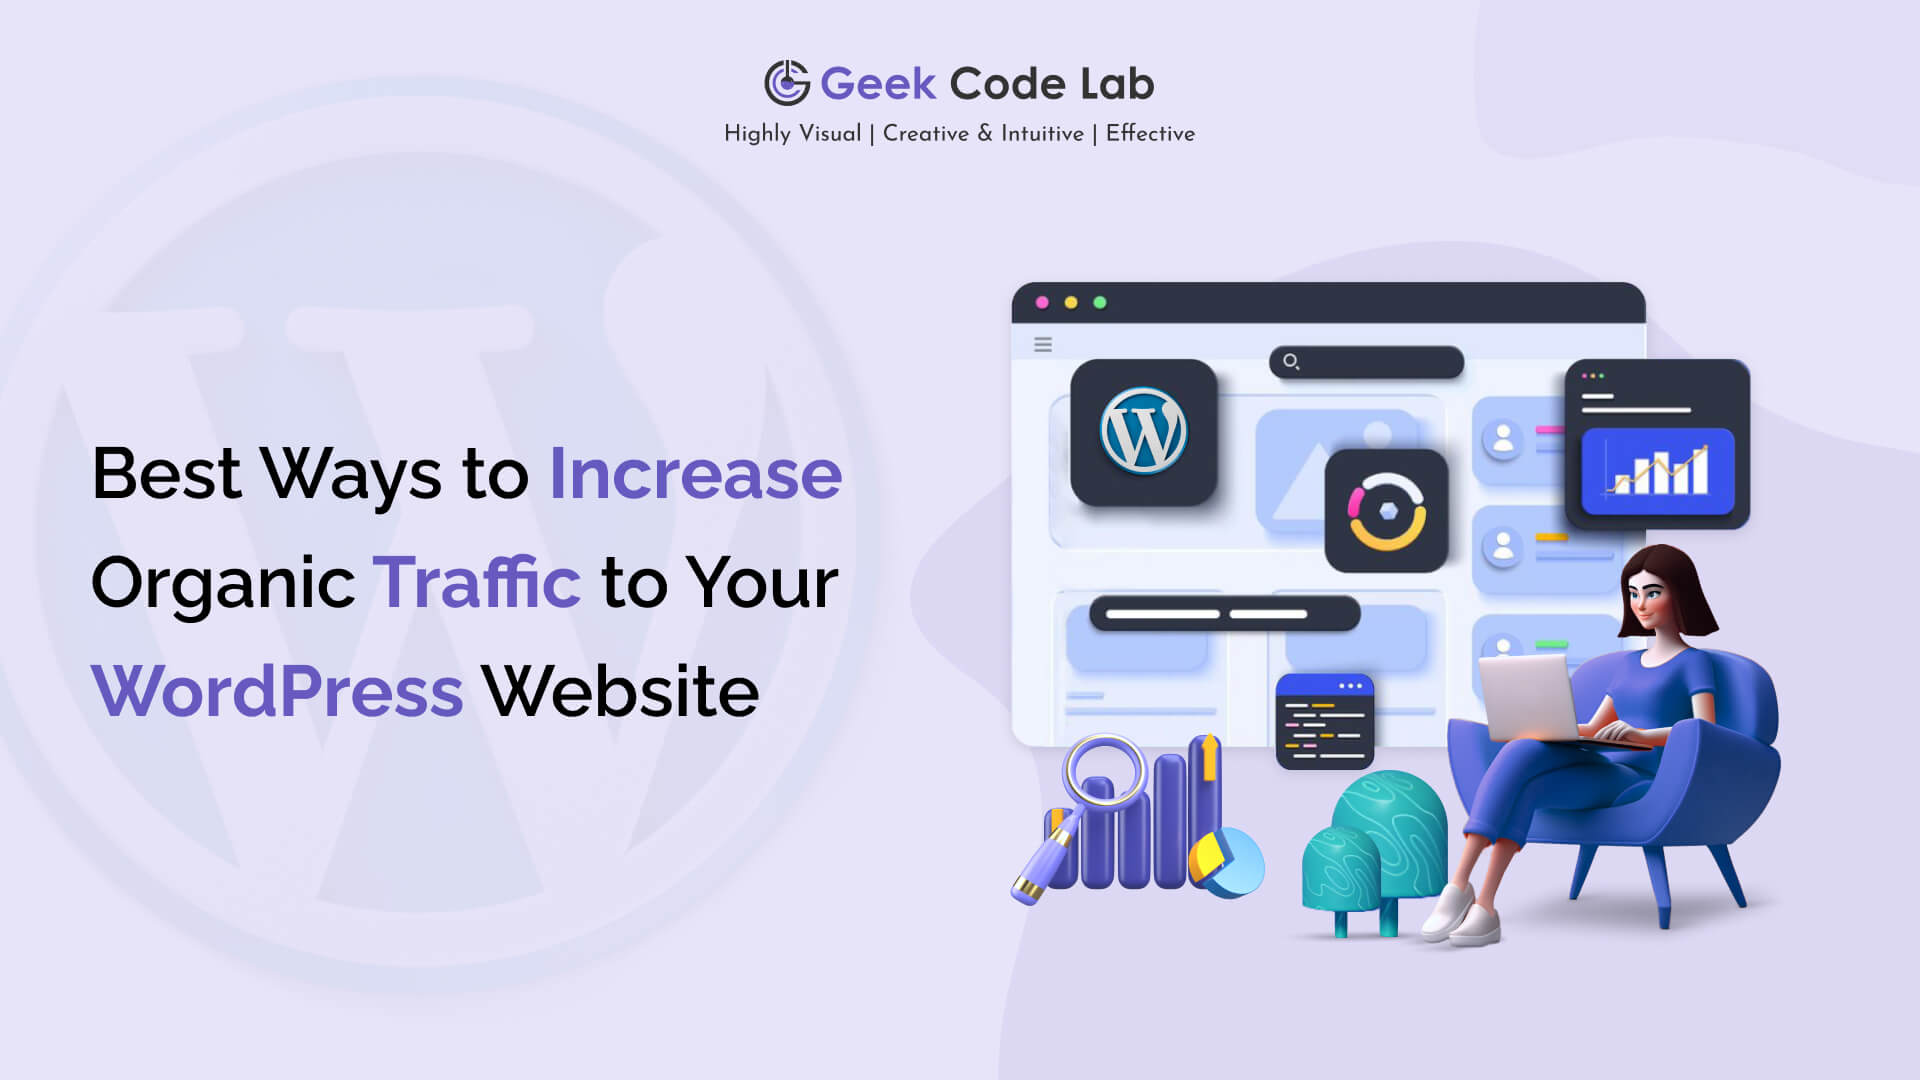 How to Optimize a WordPress Landing Page for Organic Traffic?